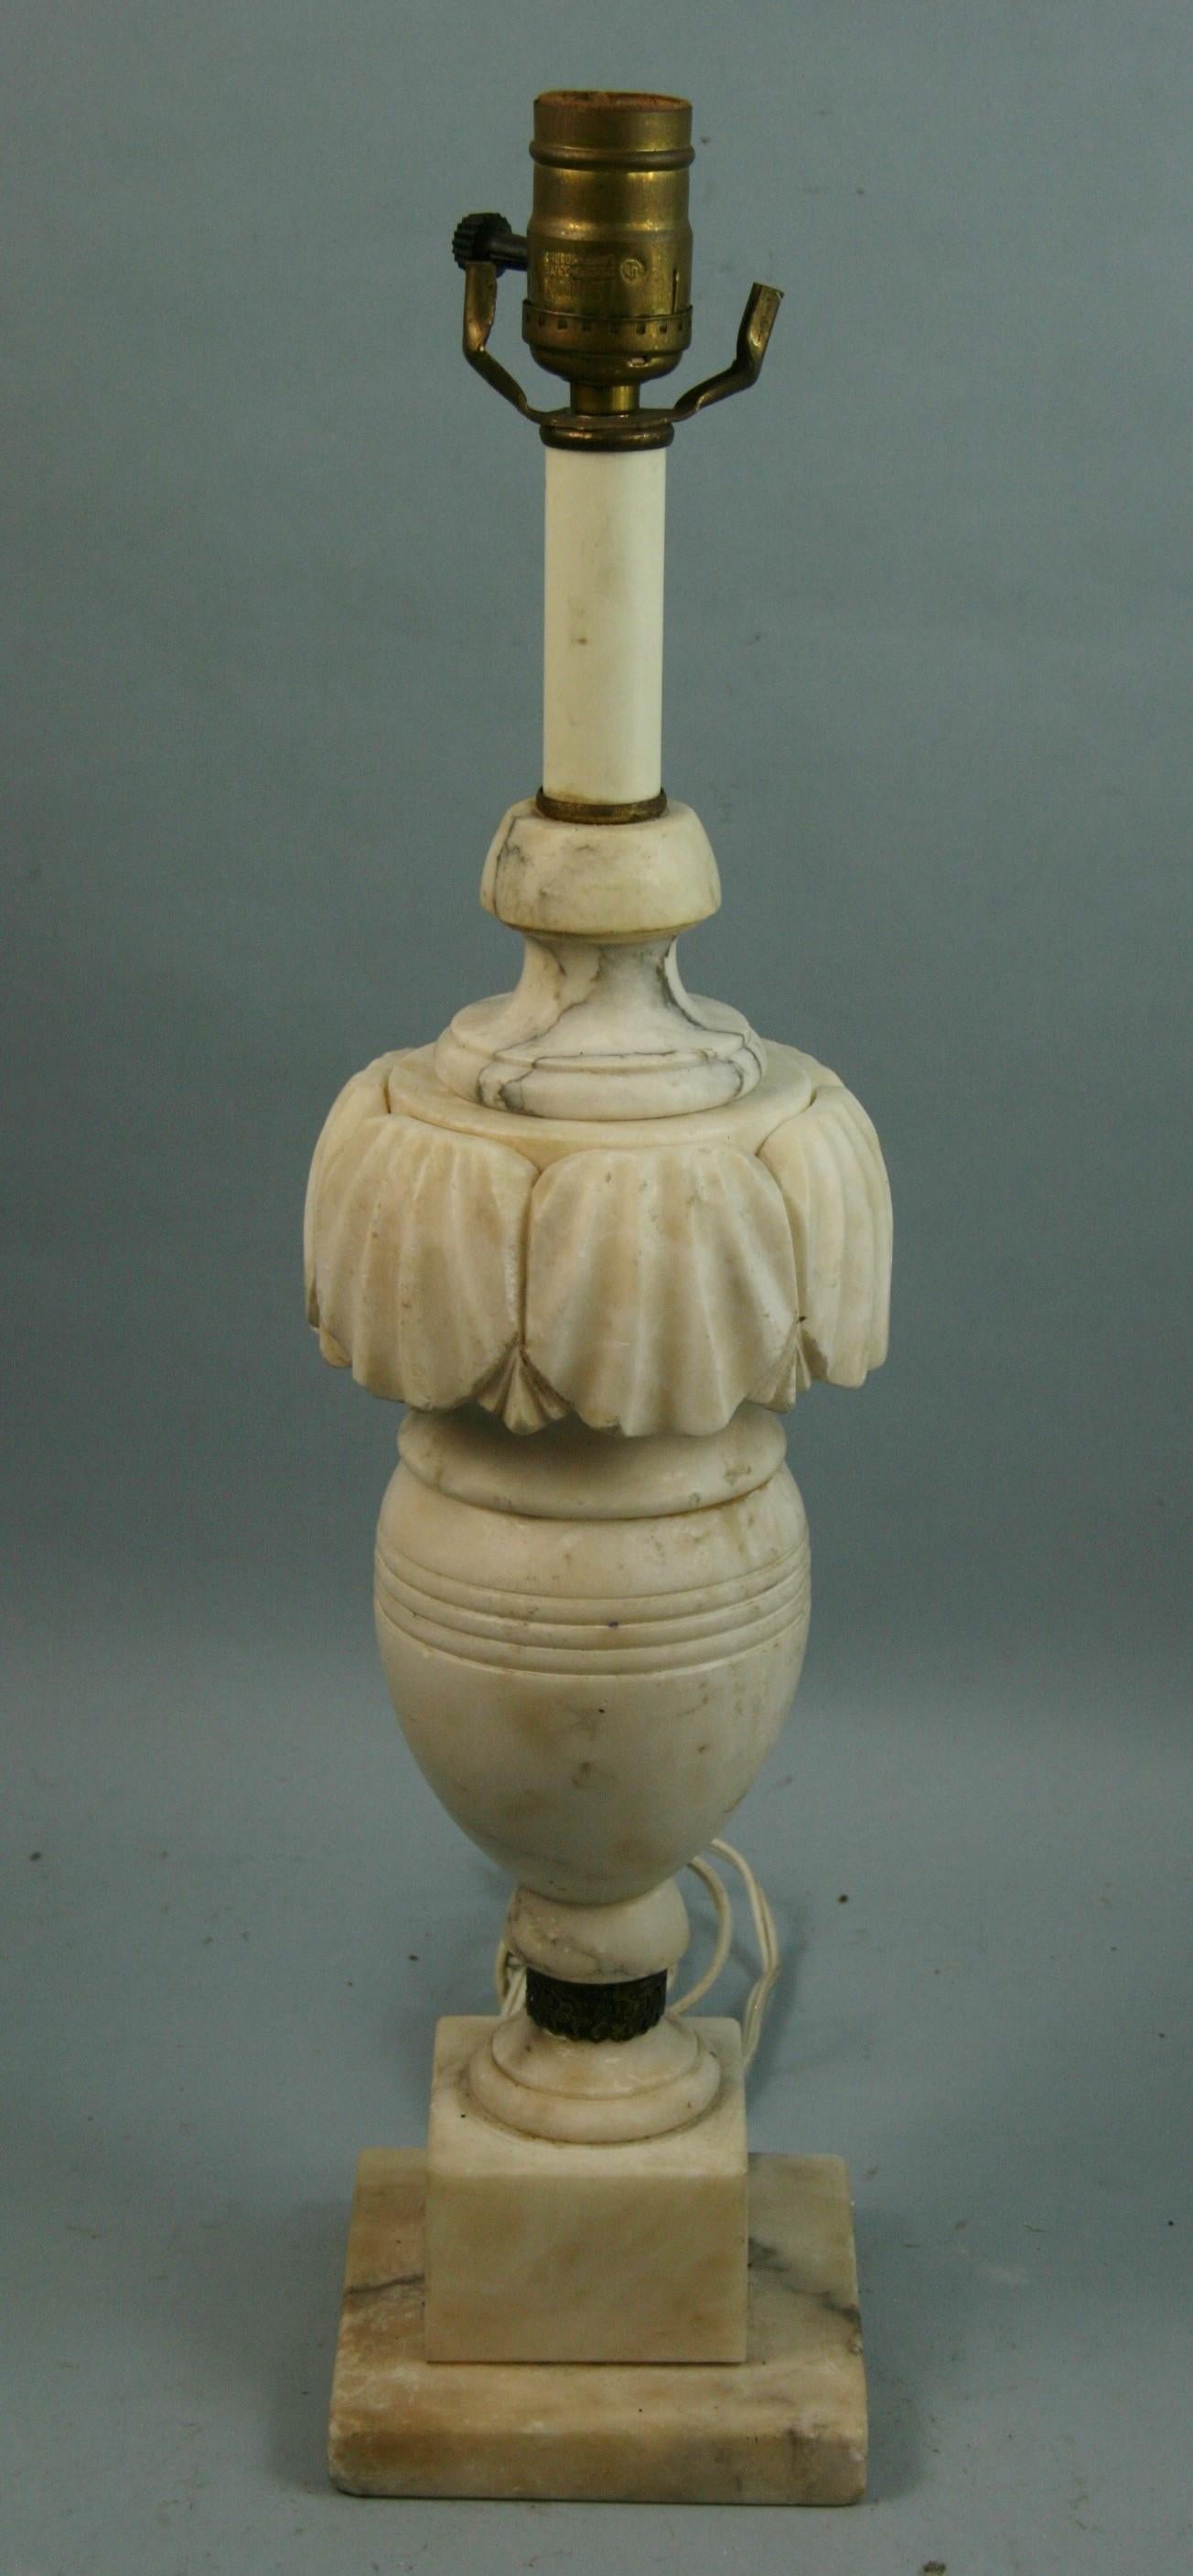 3-739 Italian alabaster lamp with shell motif
Original wiring
Height top of socket 20.75